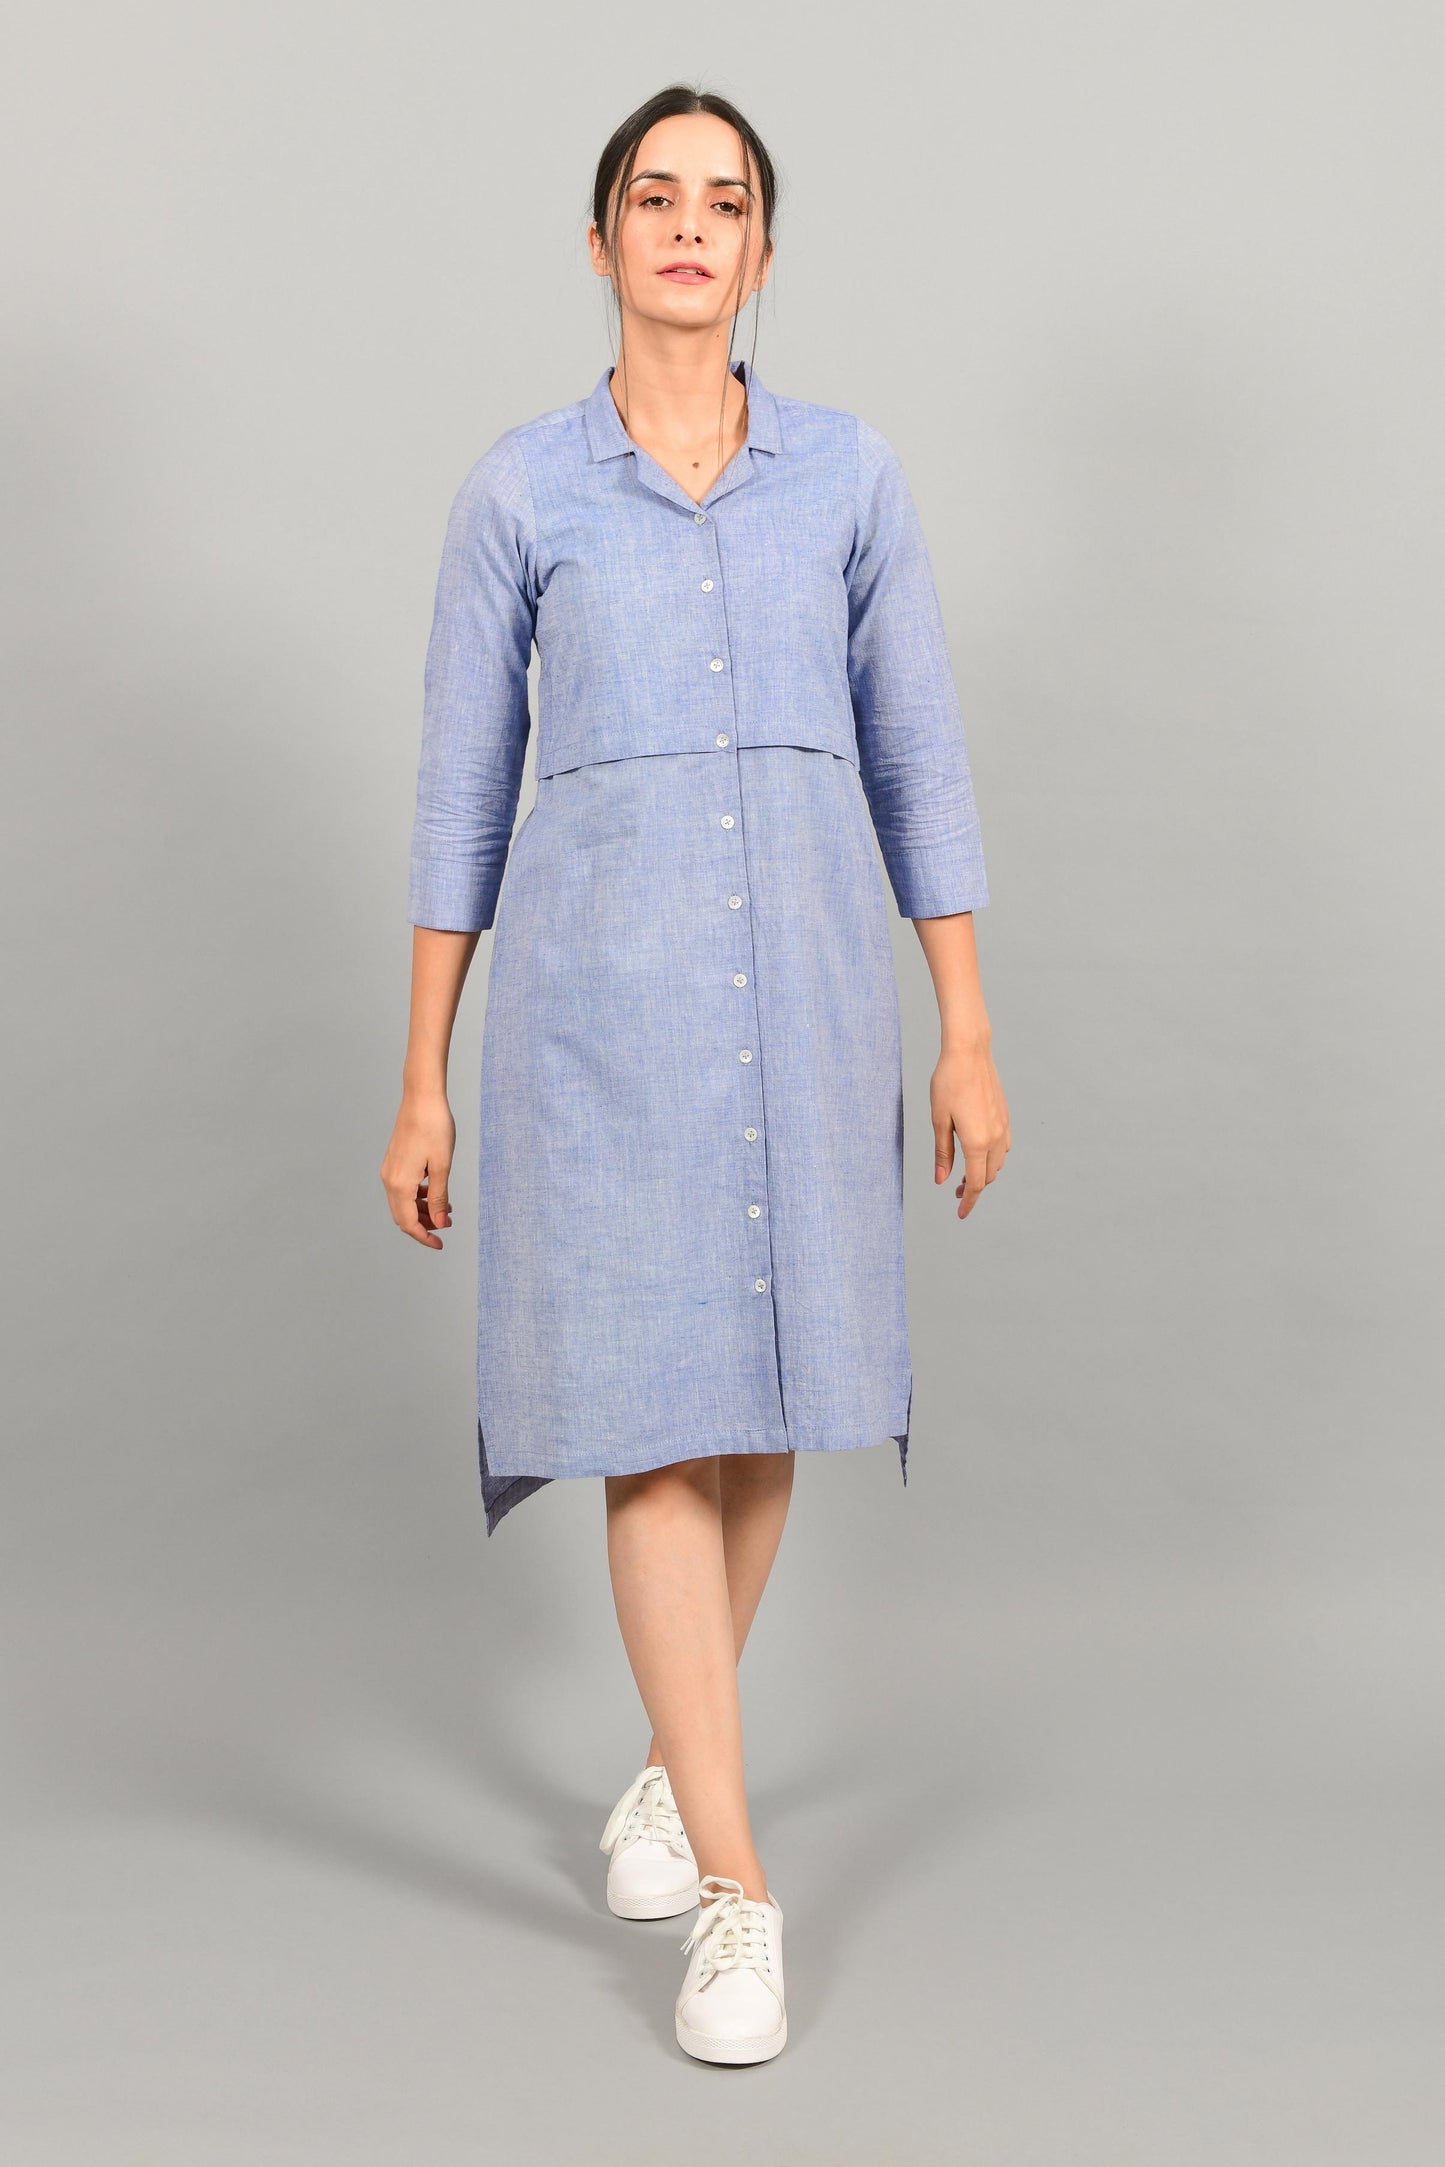 Front pose of an Indian female womenswear fashion model in a blue chambray handspun and handwoven khadi cotton shirt dress by Cotton Rack.